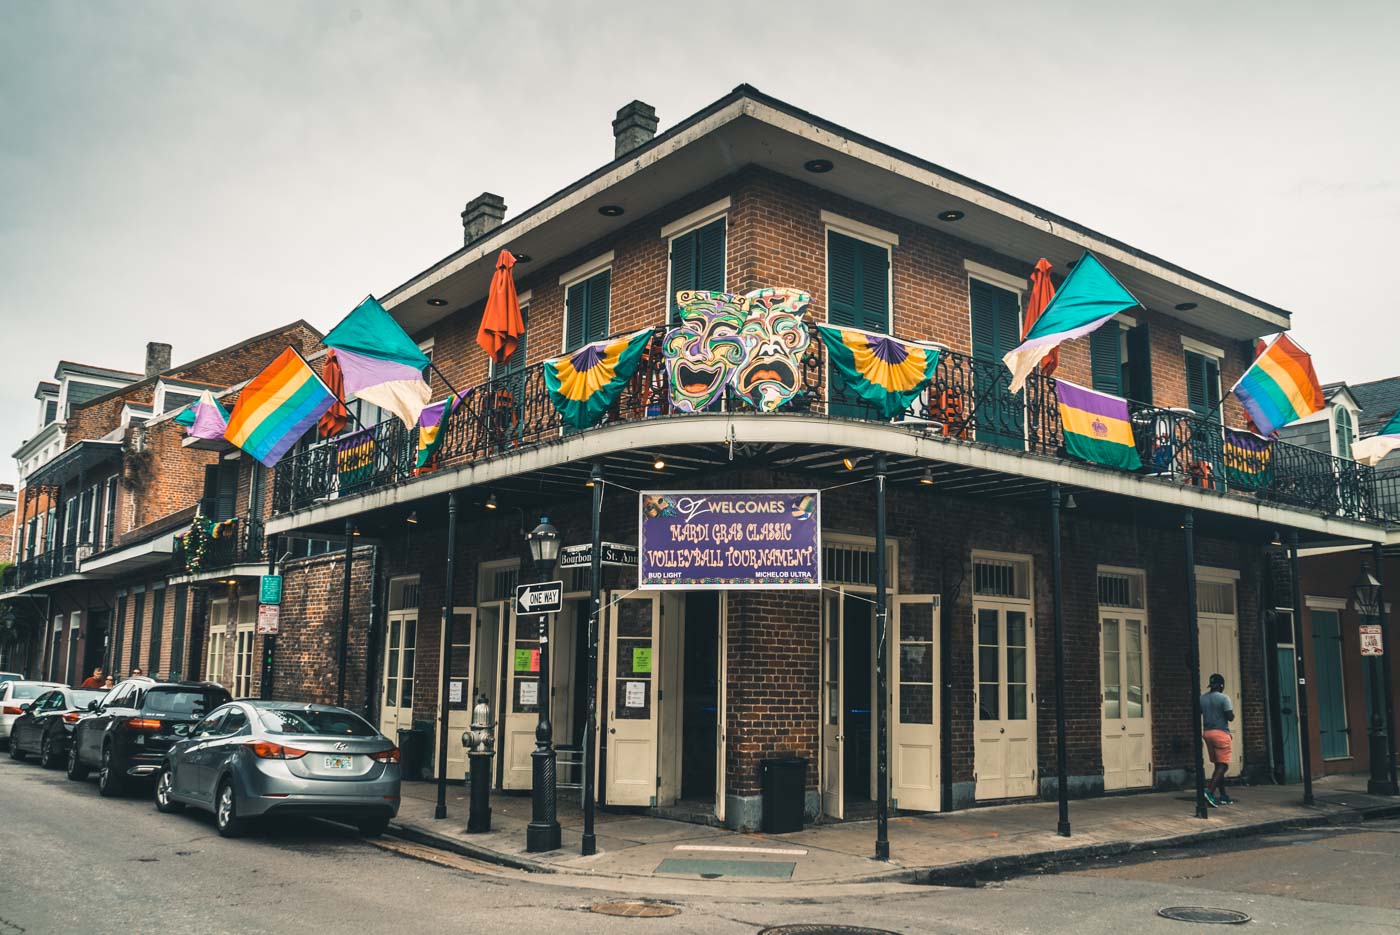 Sunday City Guide: What to Do in New Orleans, USA